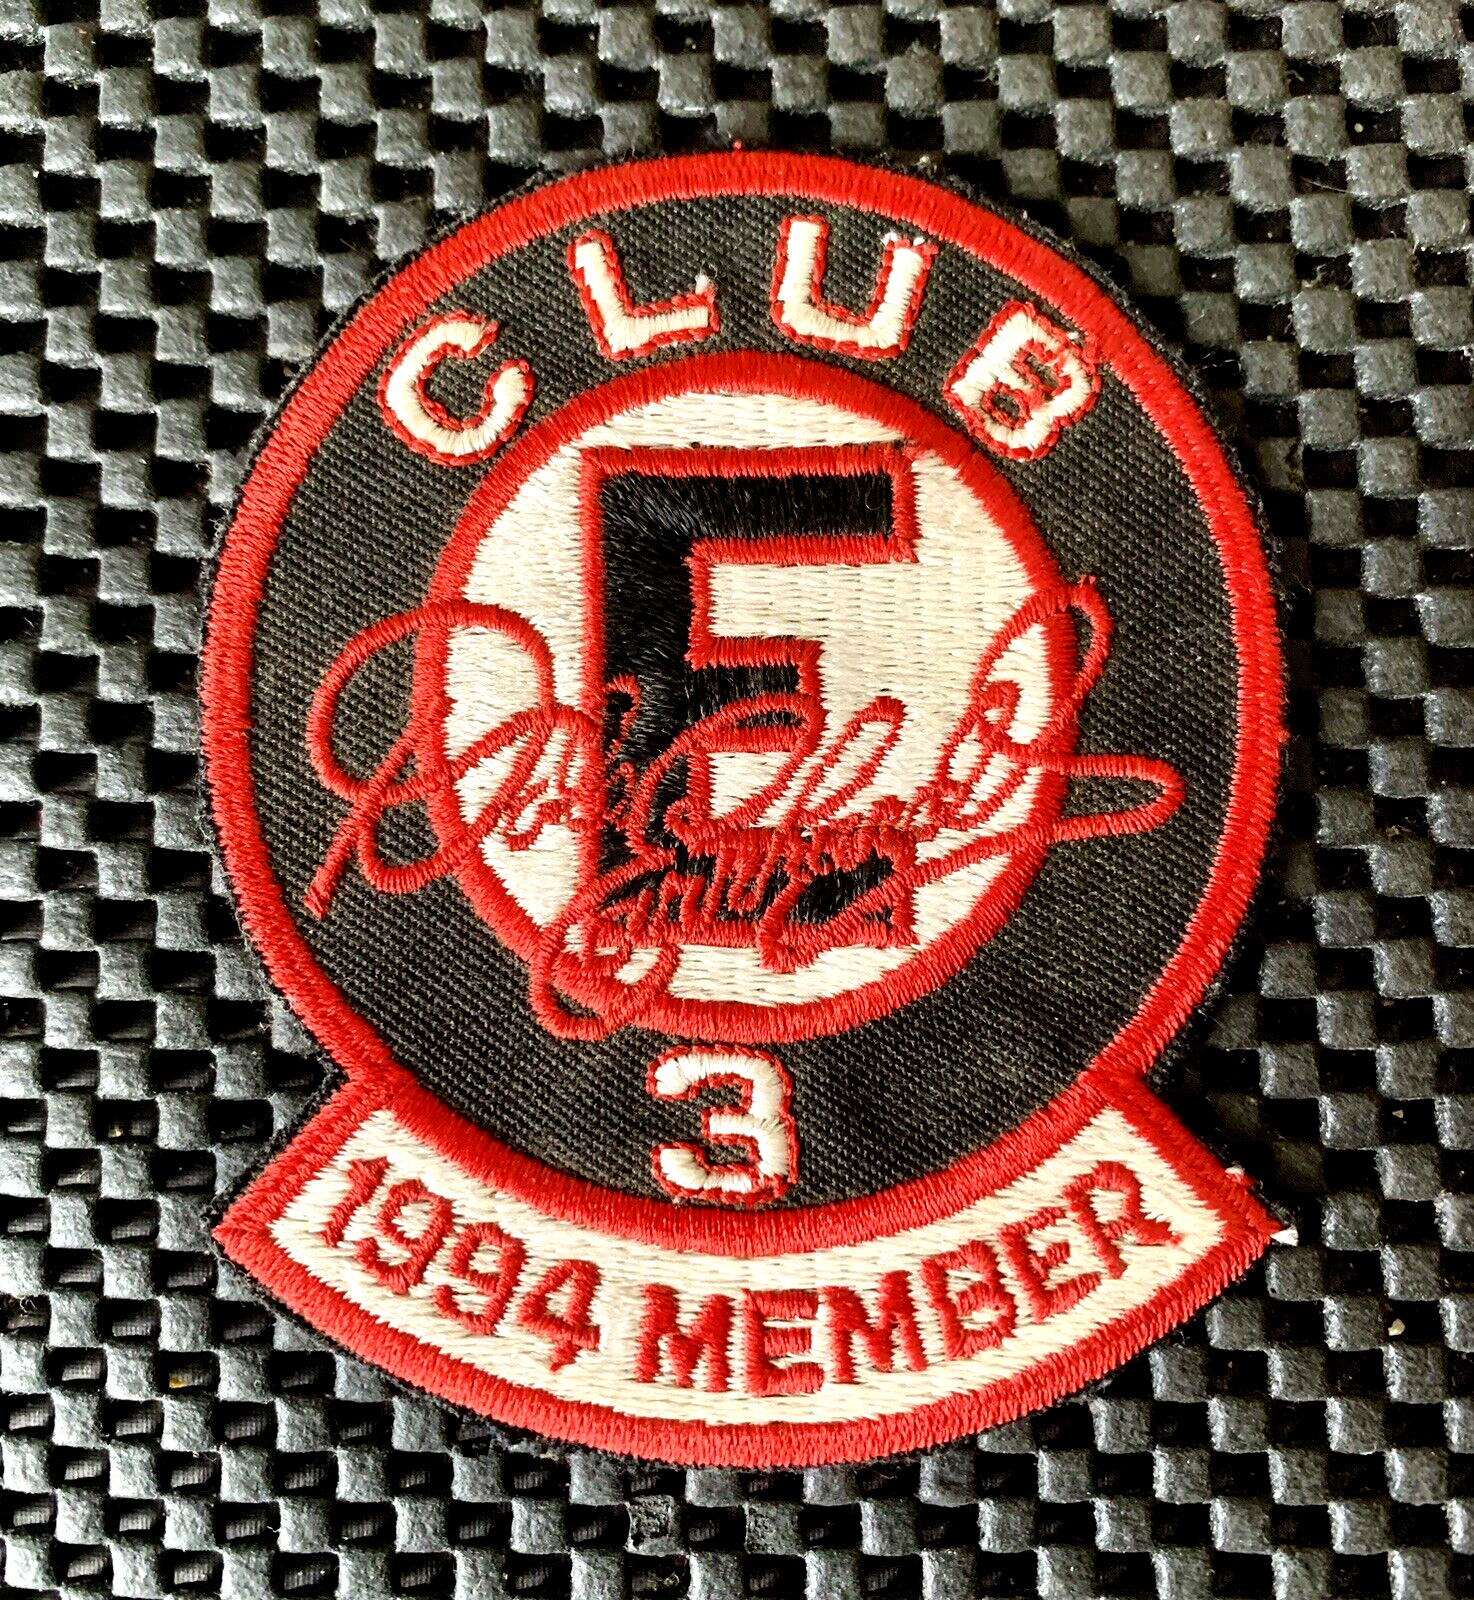 DALE EARNHARDT CLUB E 1994 MEMBER EMBROIDERED SEW ON PATCH NASCAR 3 1/4 x 4\